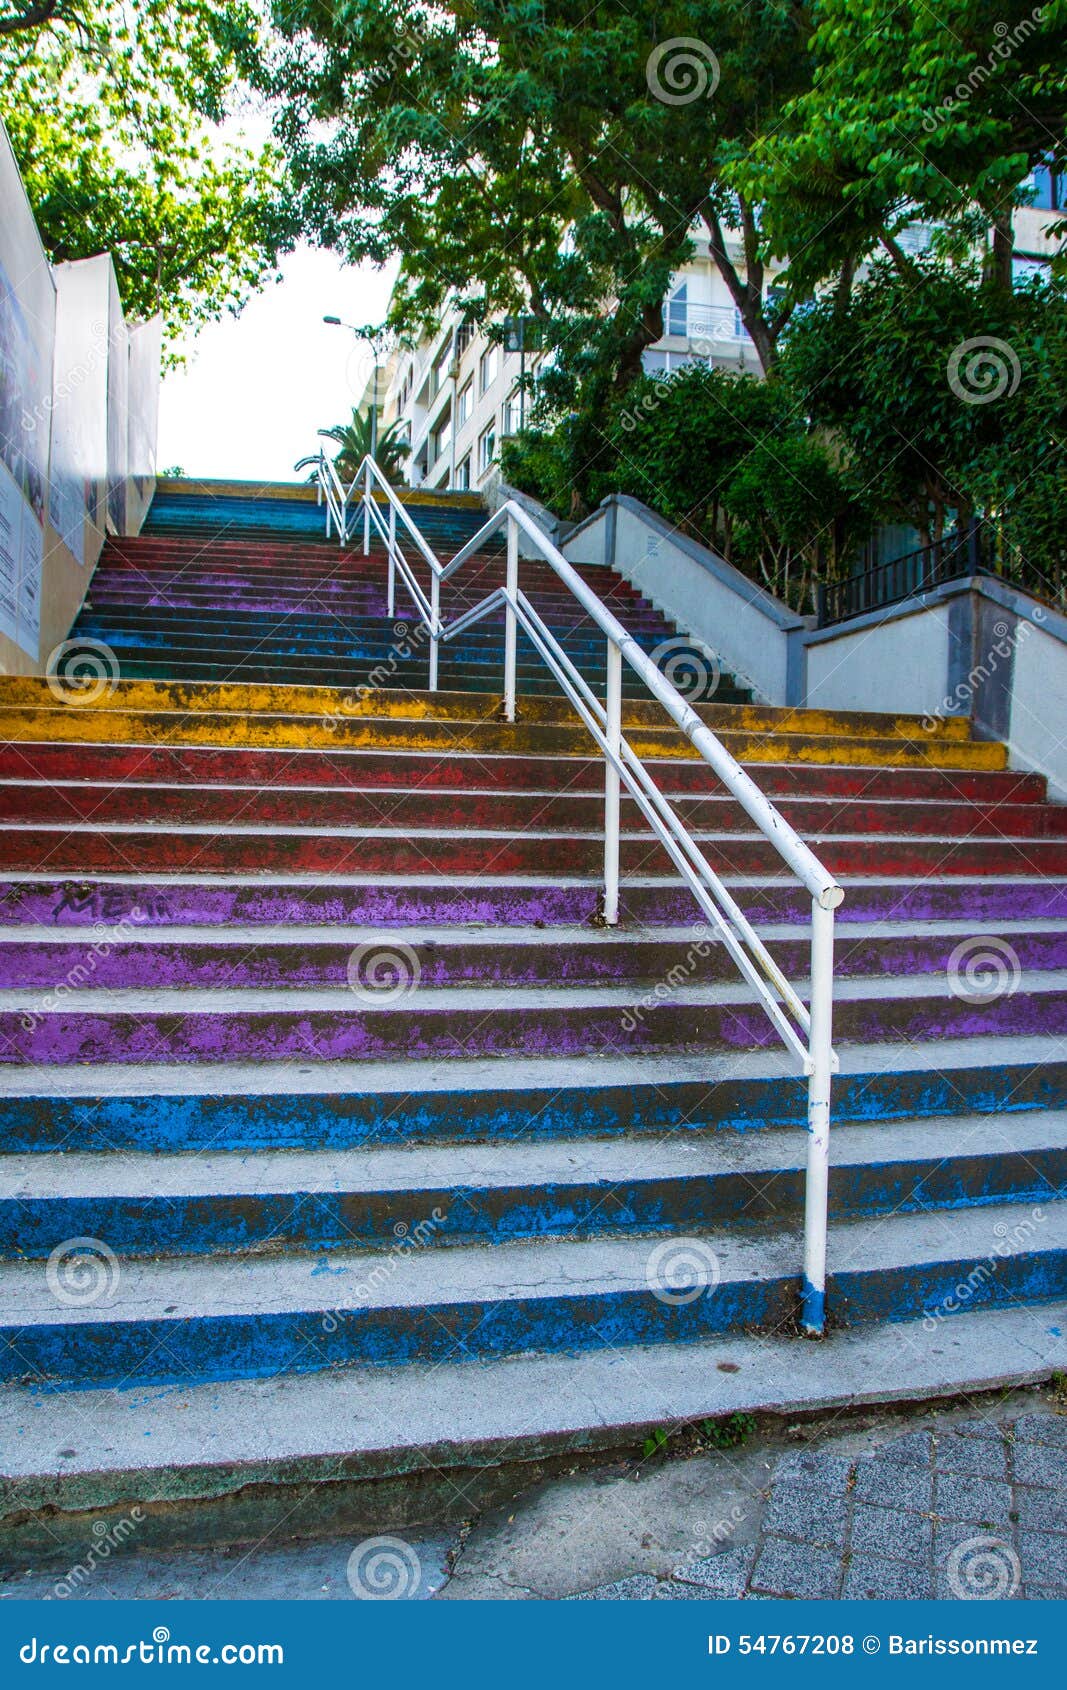 colorful stairs in moda, istanbul